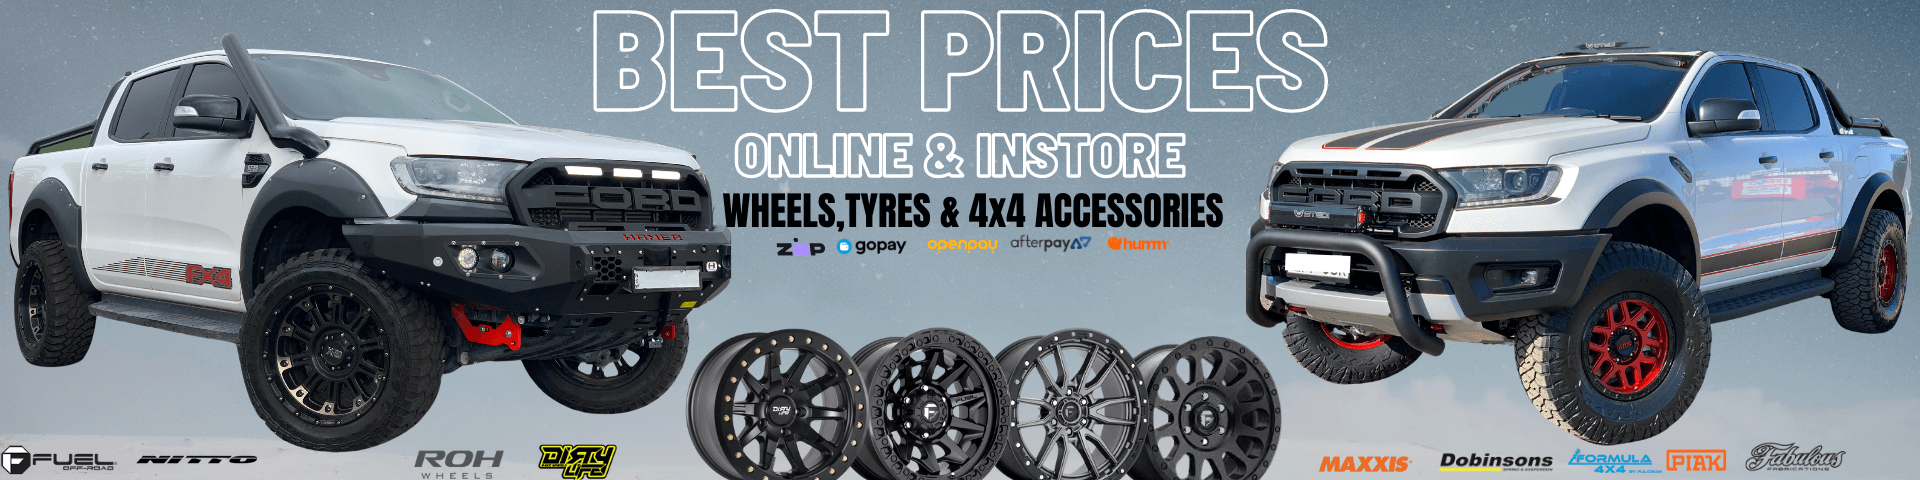 Best prices online and instore